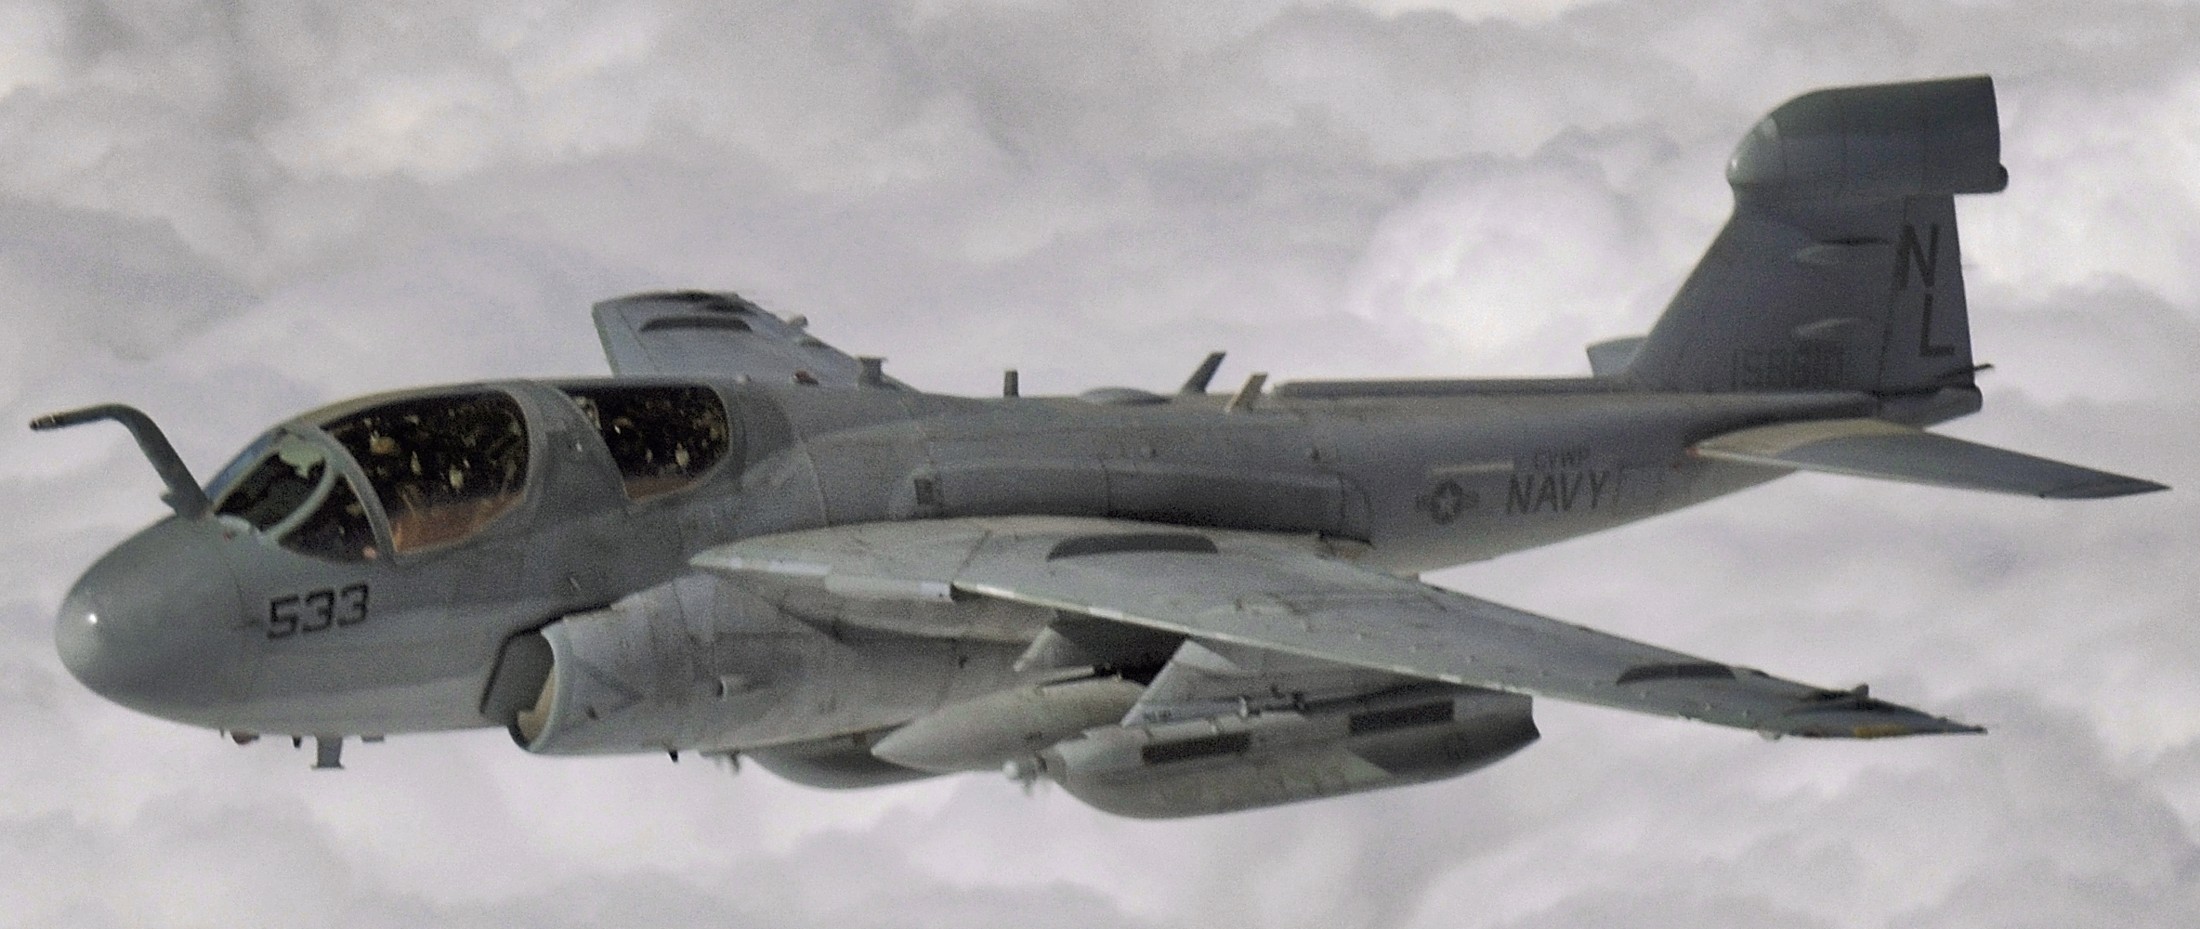 vaq-133 wizards electronic attack squadron vaqron us navy grumman ea-6b prowler bagram air base afghanistan 142